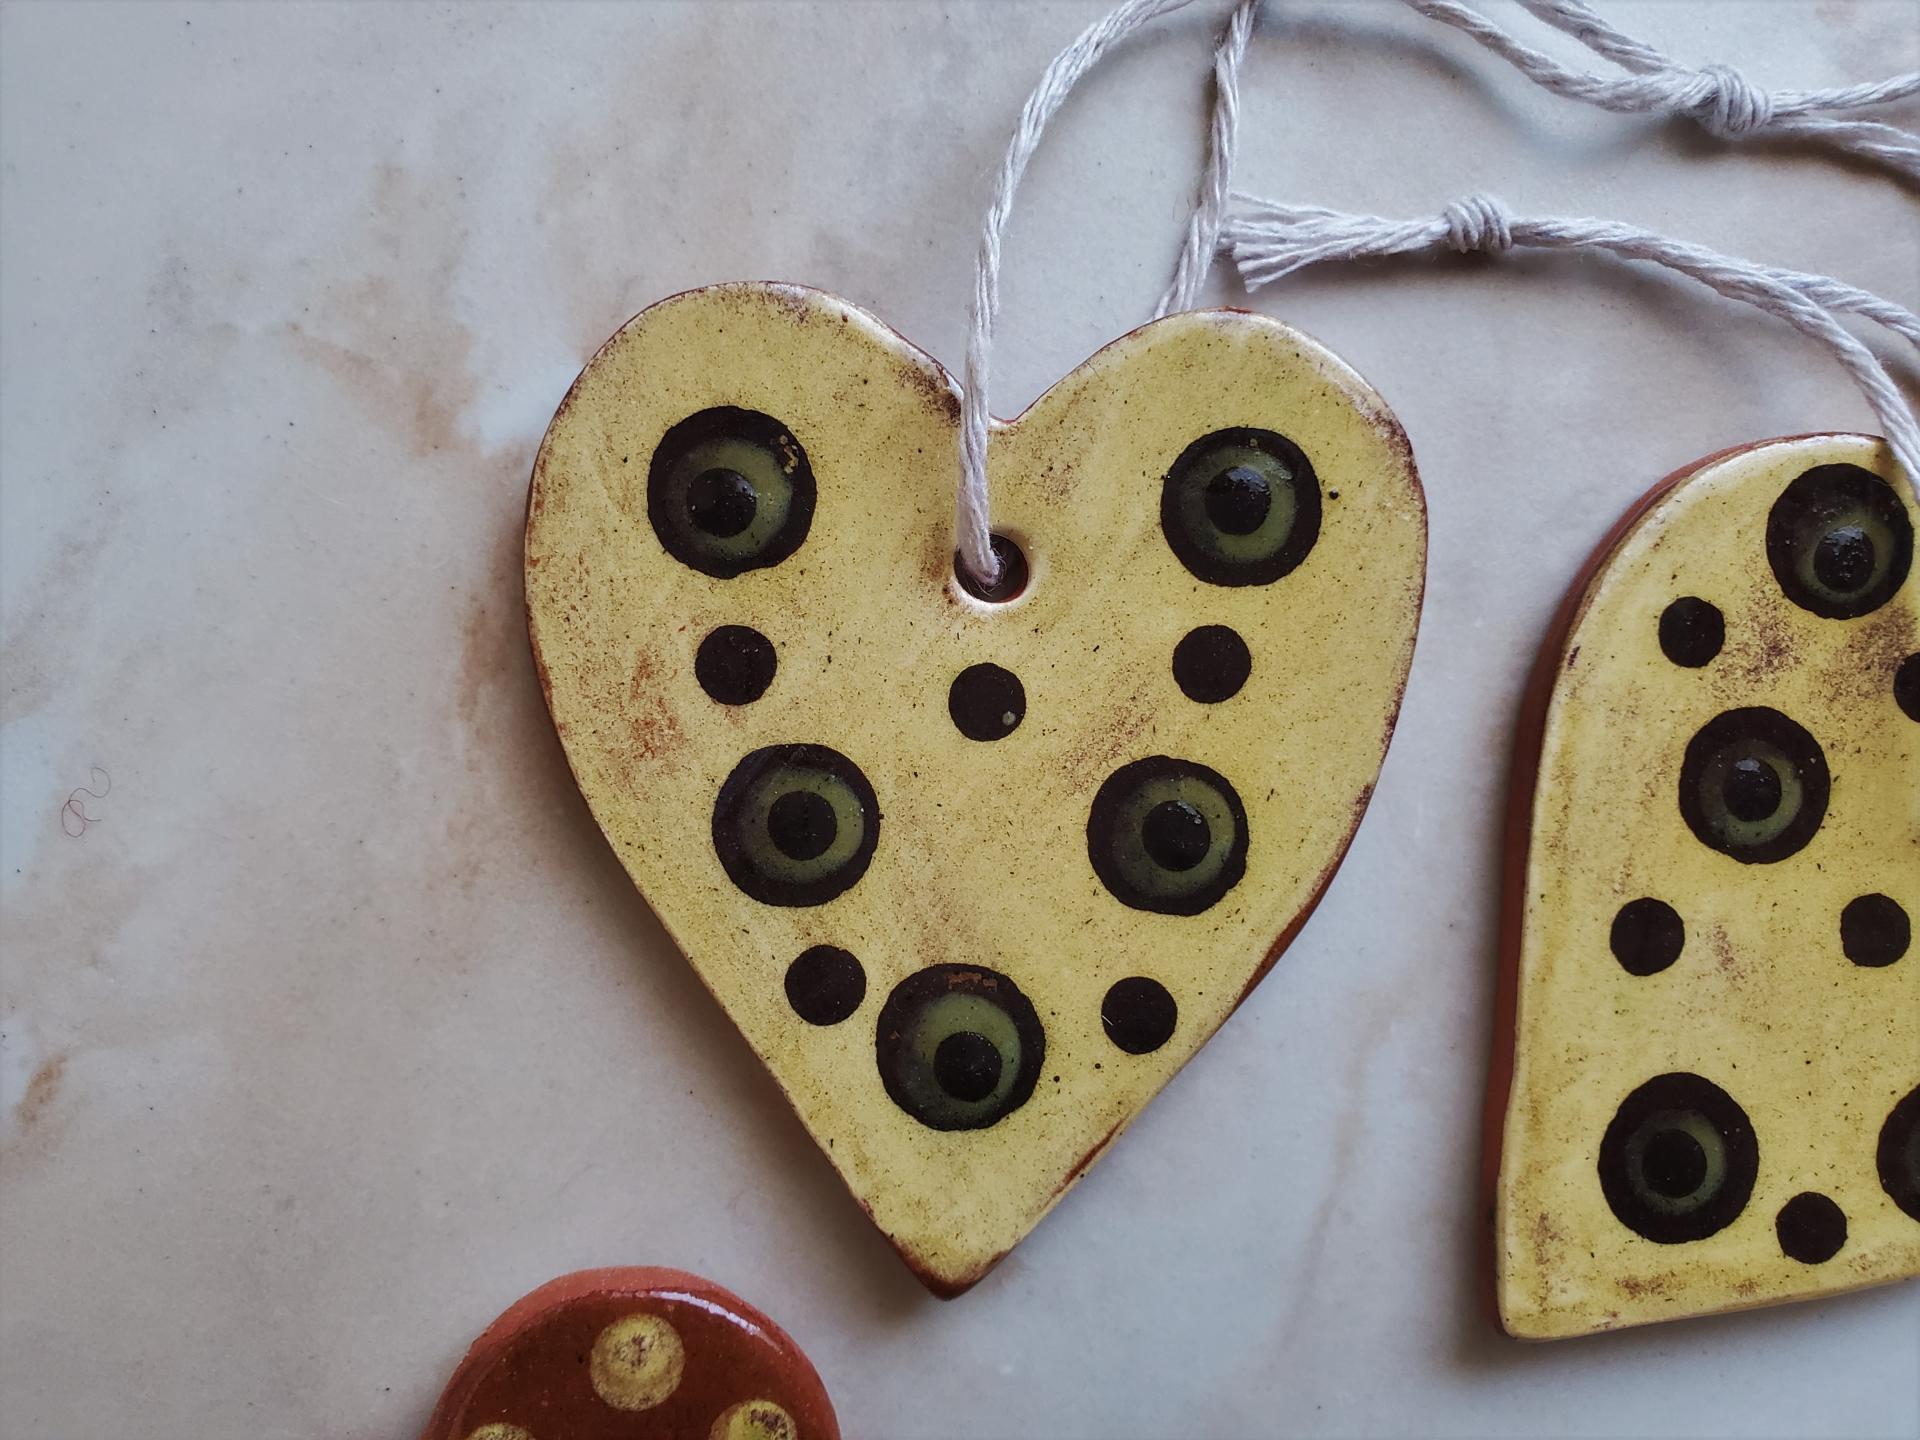 Set of Two Heart-Shaped Redware Ornaments with Green and Black Polka Dots Slip Decoration